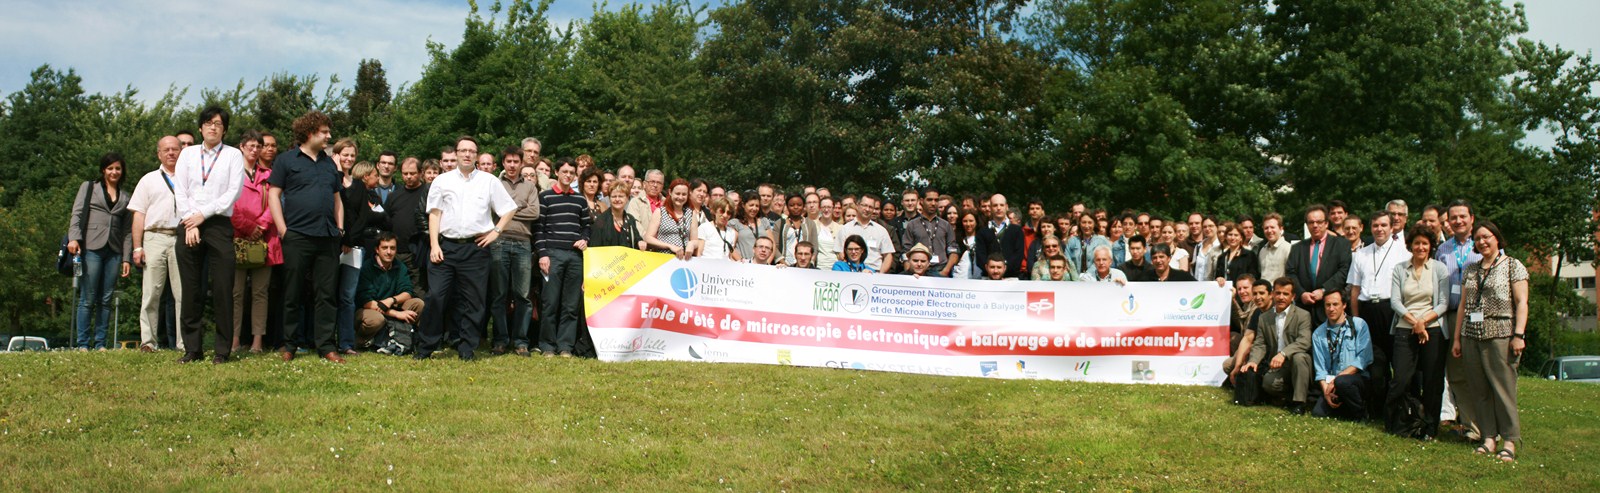 Lille-2012_photo-groupe